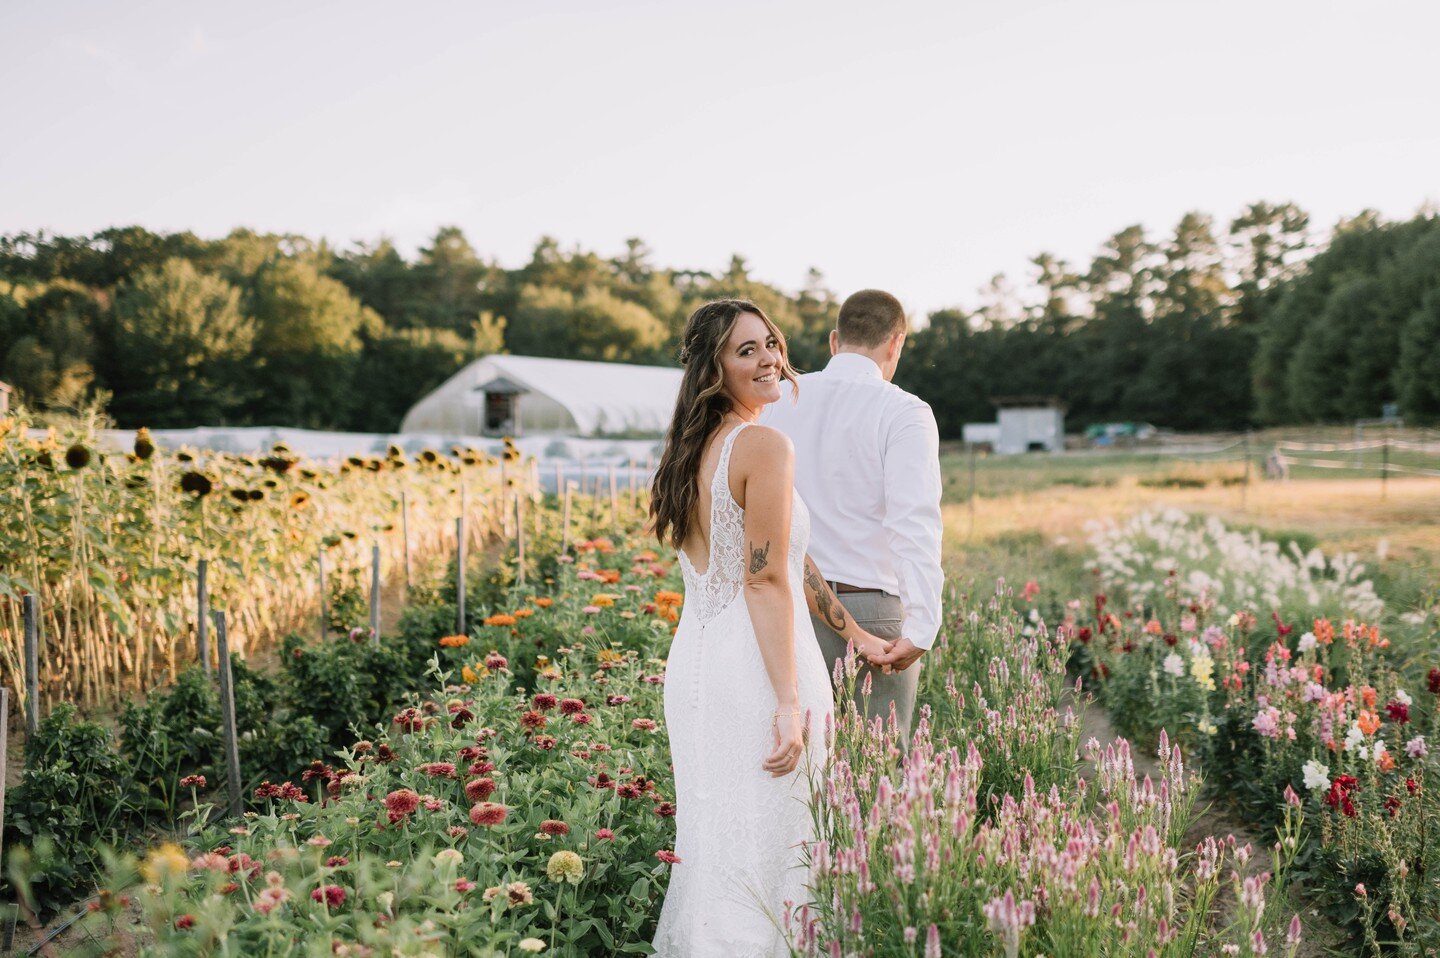 Becky + Chris in the flower garden in August 💕

Gorgeous photo by @carolinamarlesphotography